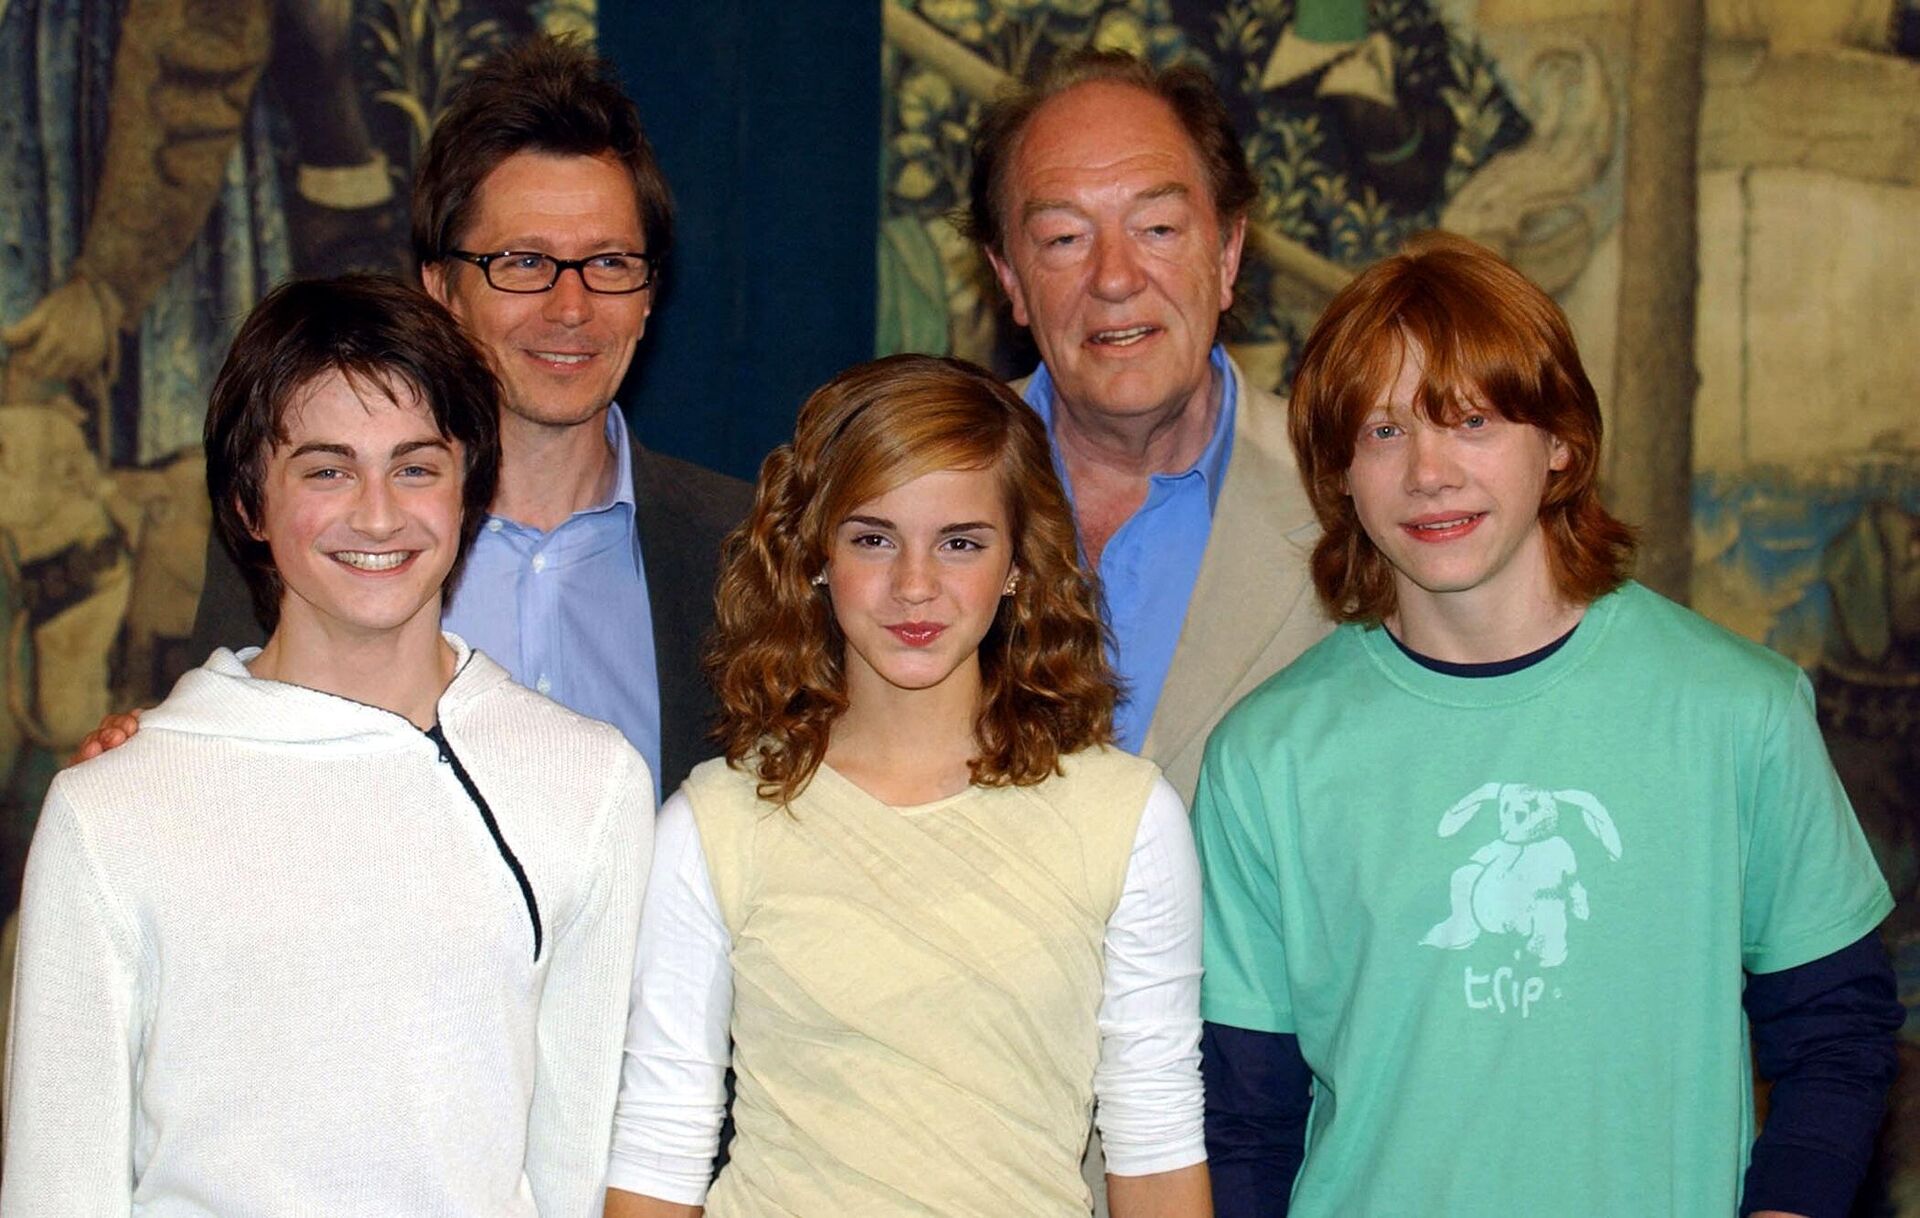 Daniel Radcliffe (Harry Potter); Gary Oldman (Sirius Black); Emma Watson (Hermione Granger) ; Michael Gambon (Dumbledore) and Rupert Grint (Ron Weasley), pose at a photocall at London's Liberal Club 27 May, 2004 for the next movie in the Harry Potter series. Harry Potter and Prisoner of Azkaban, will premier in London 30 May. - Sputnik International, 1920, 28.09.2023